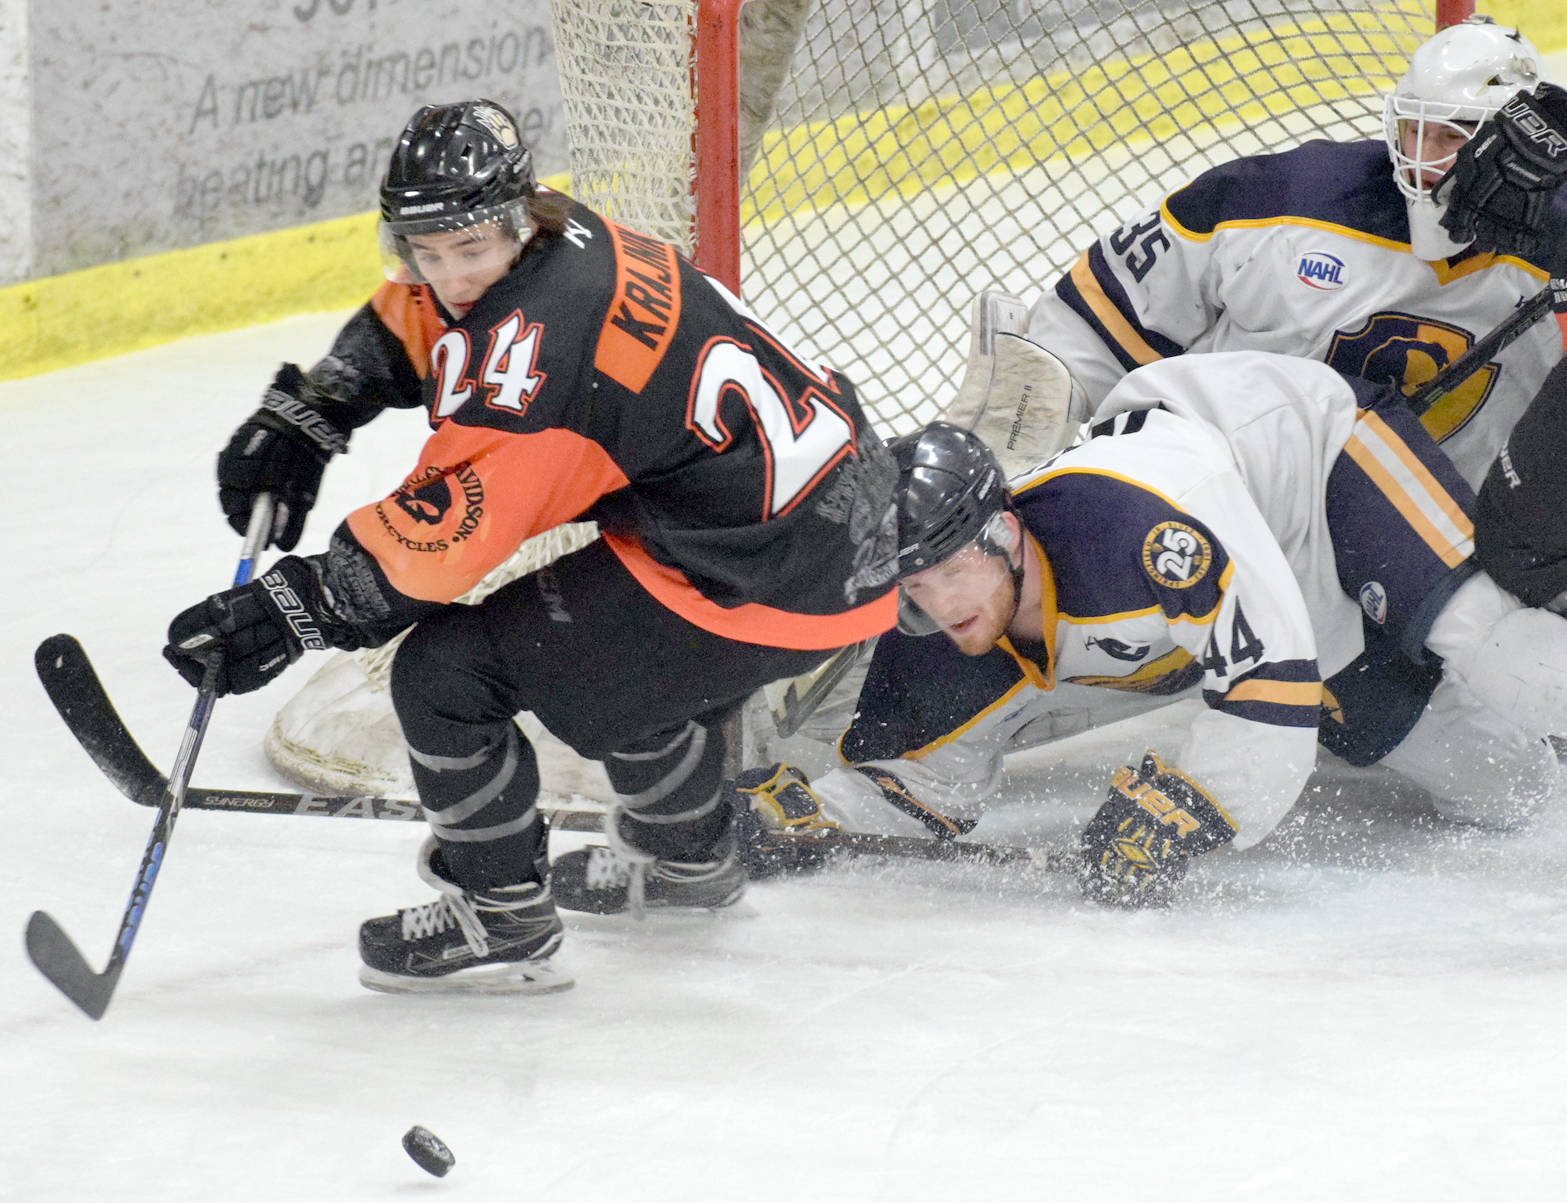 Kenai River Brown Bears forward Zach Krajnik tries to score late in the first period but is blocked by Springfield (Illinois) Jr. Blues defenseman Fletcher Fineman and goalie Evan Fear on Thursday, March 15, 2018, at the Soldotna Regional Sports Complex. (Photo by Jeff Helminiak/Peninsula Clarion)